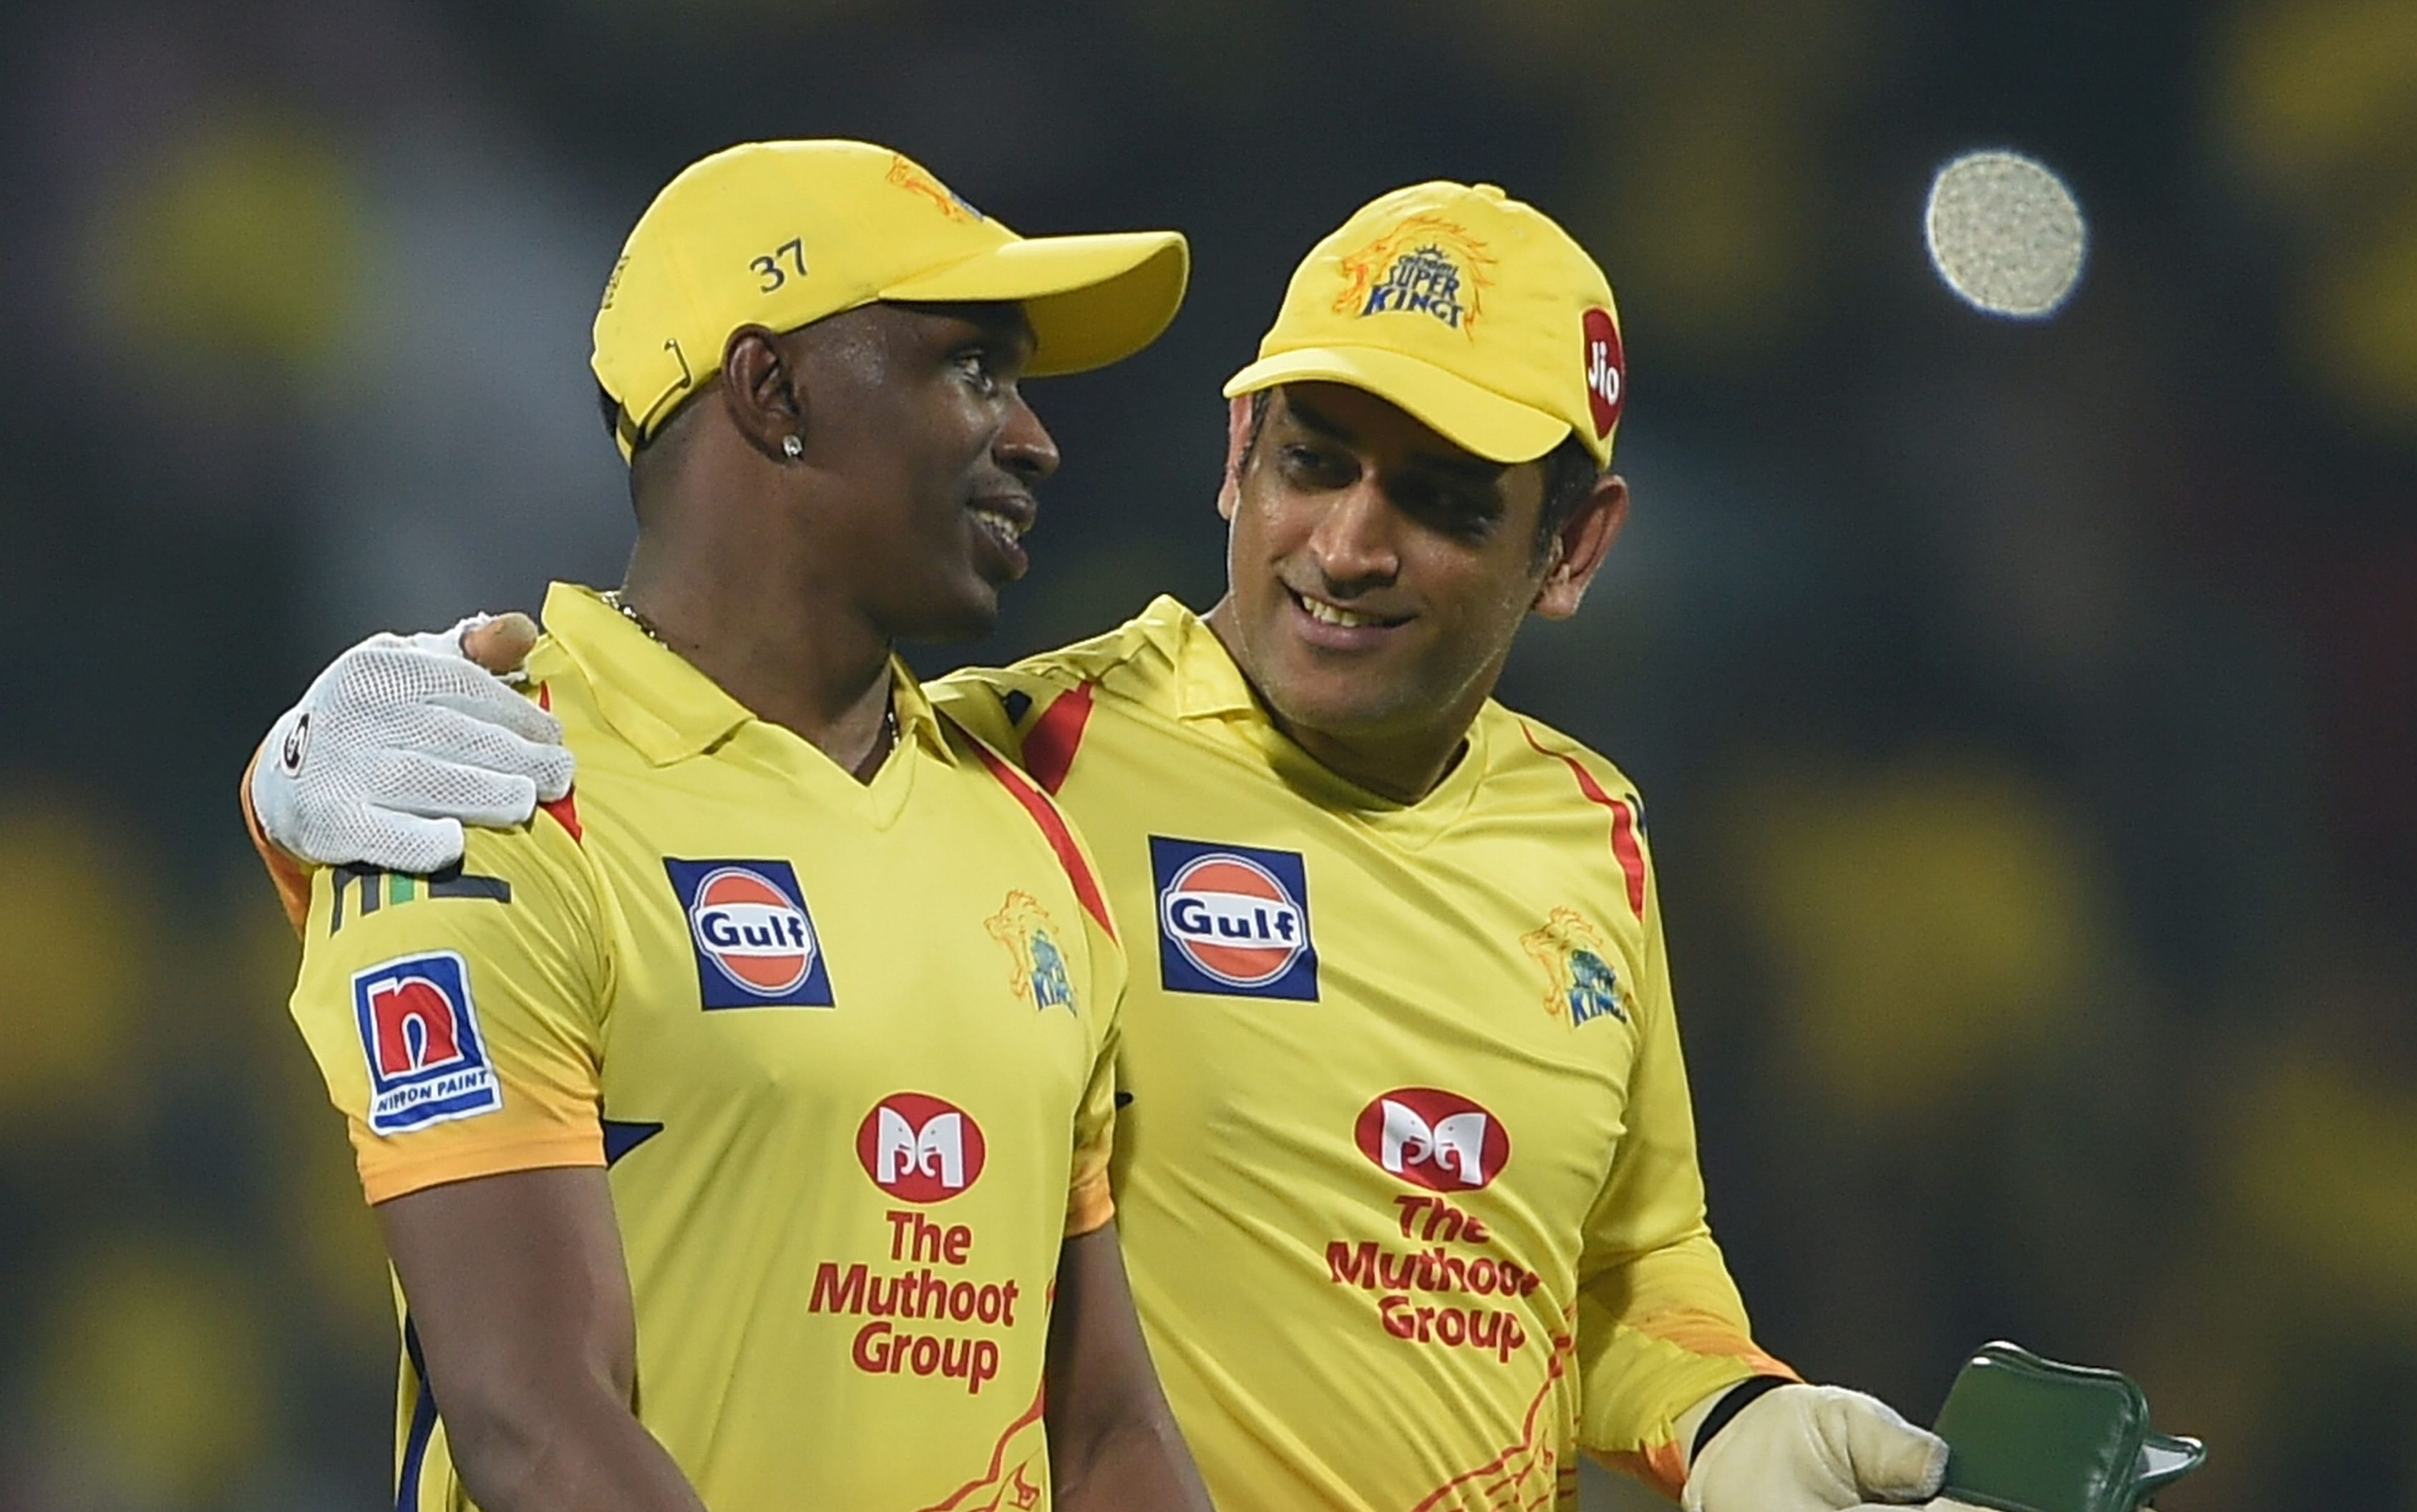 CSK skipper MS Dhoni and Dwayne Bravo celebrate their team's win in the Indian Premier League 2019. Credit: PTI